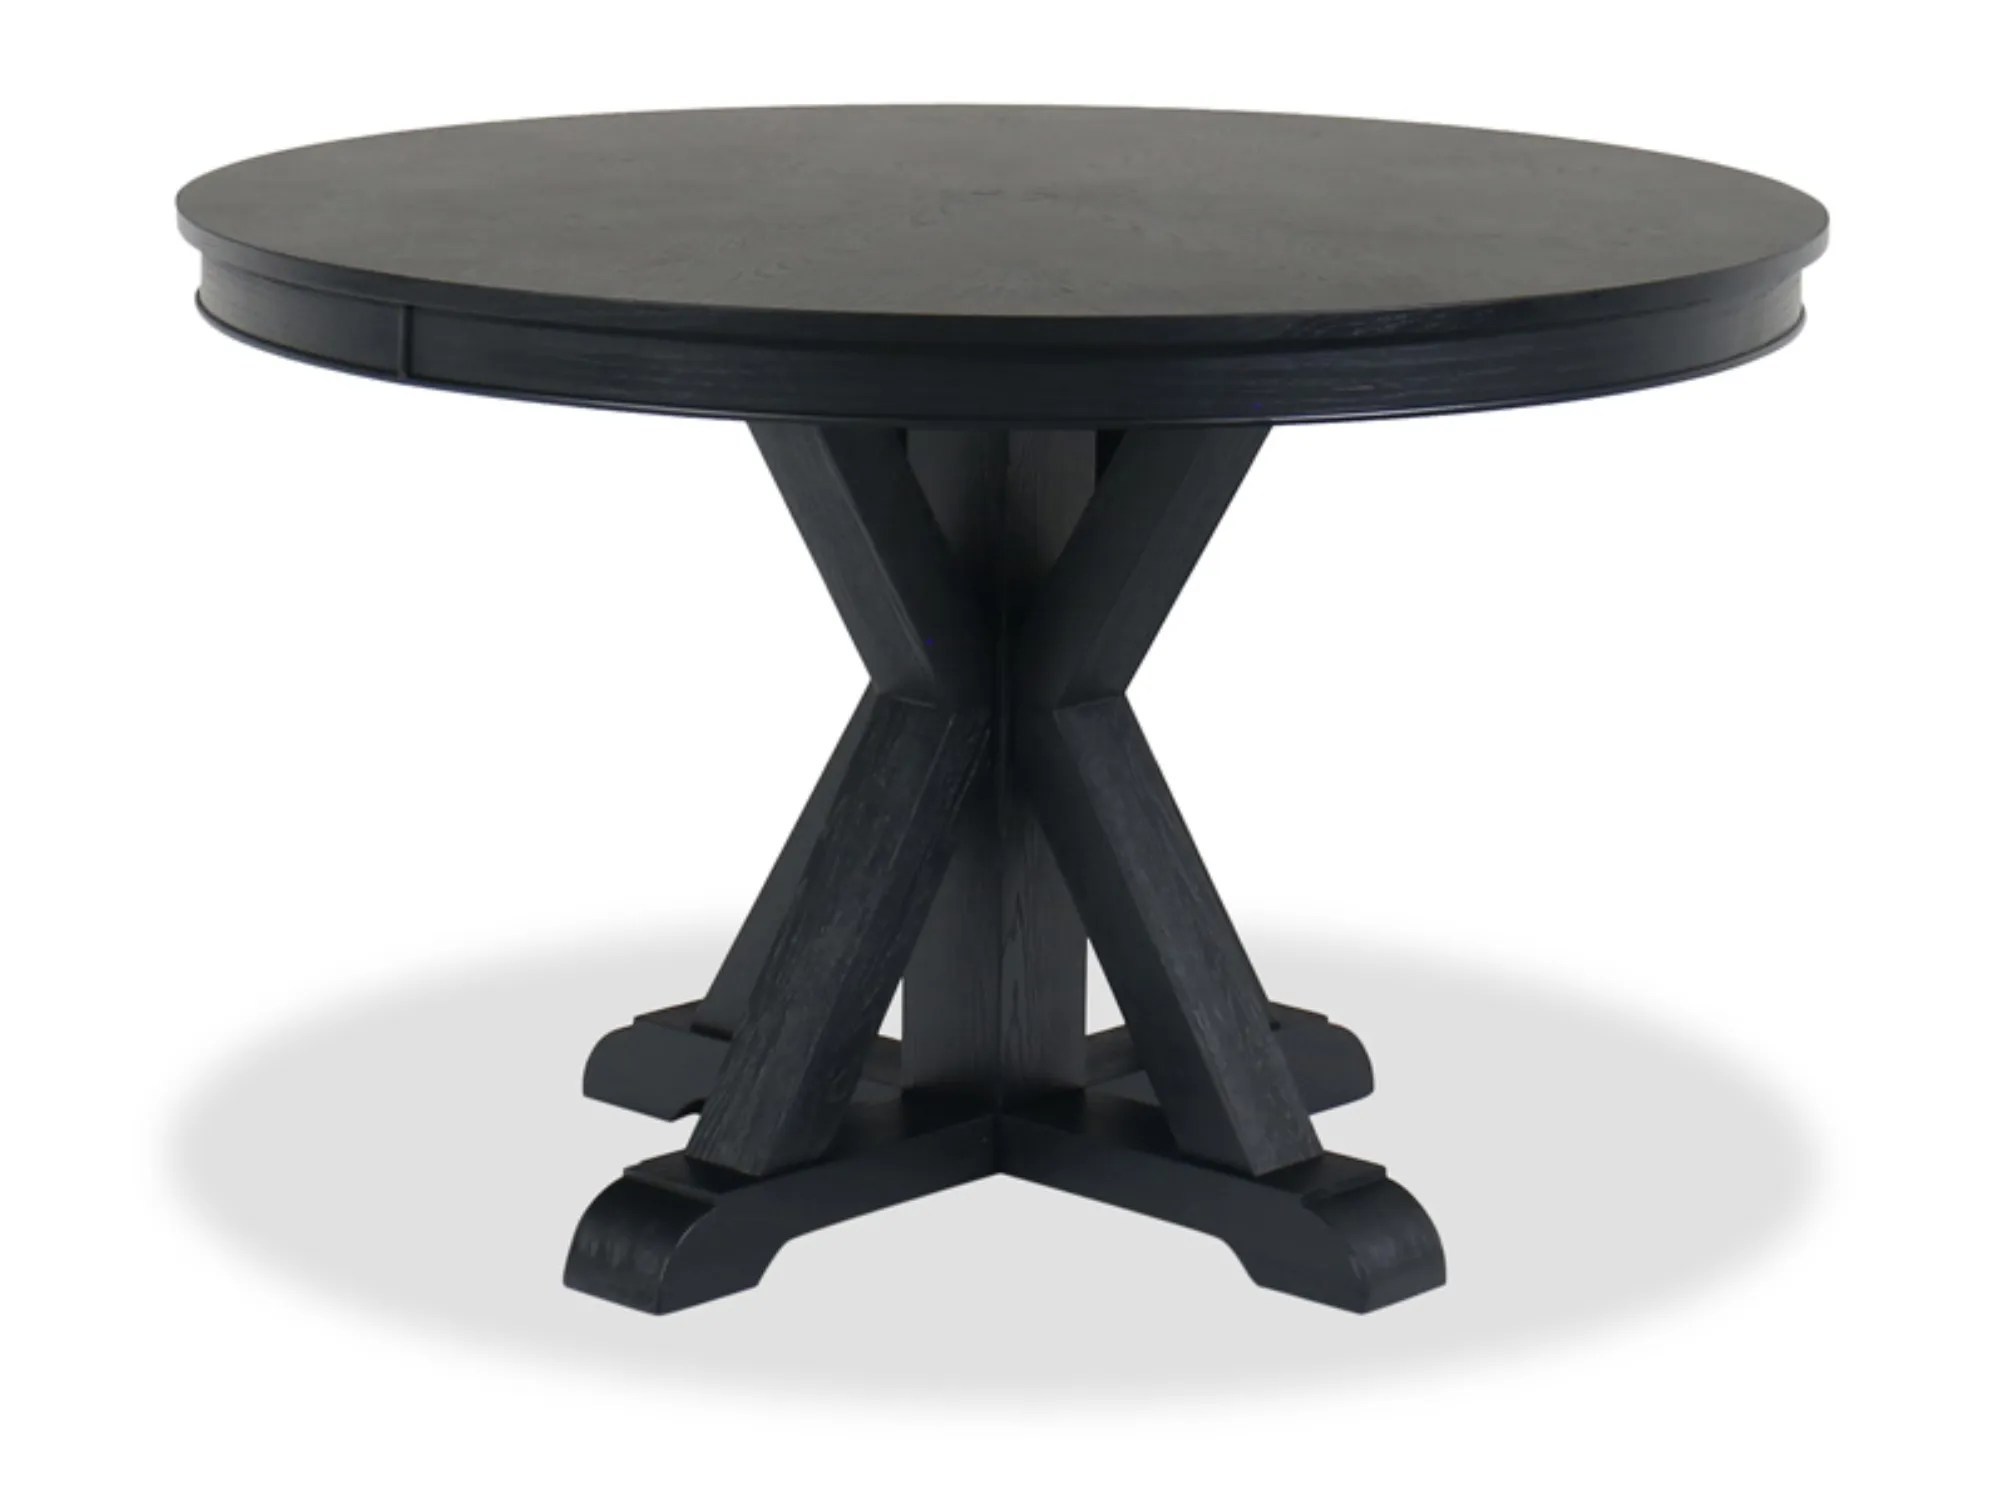 Rylie 48-inch Round Dining Table